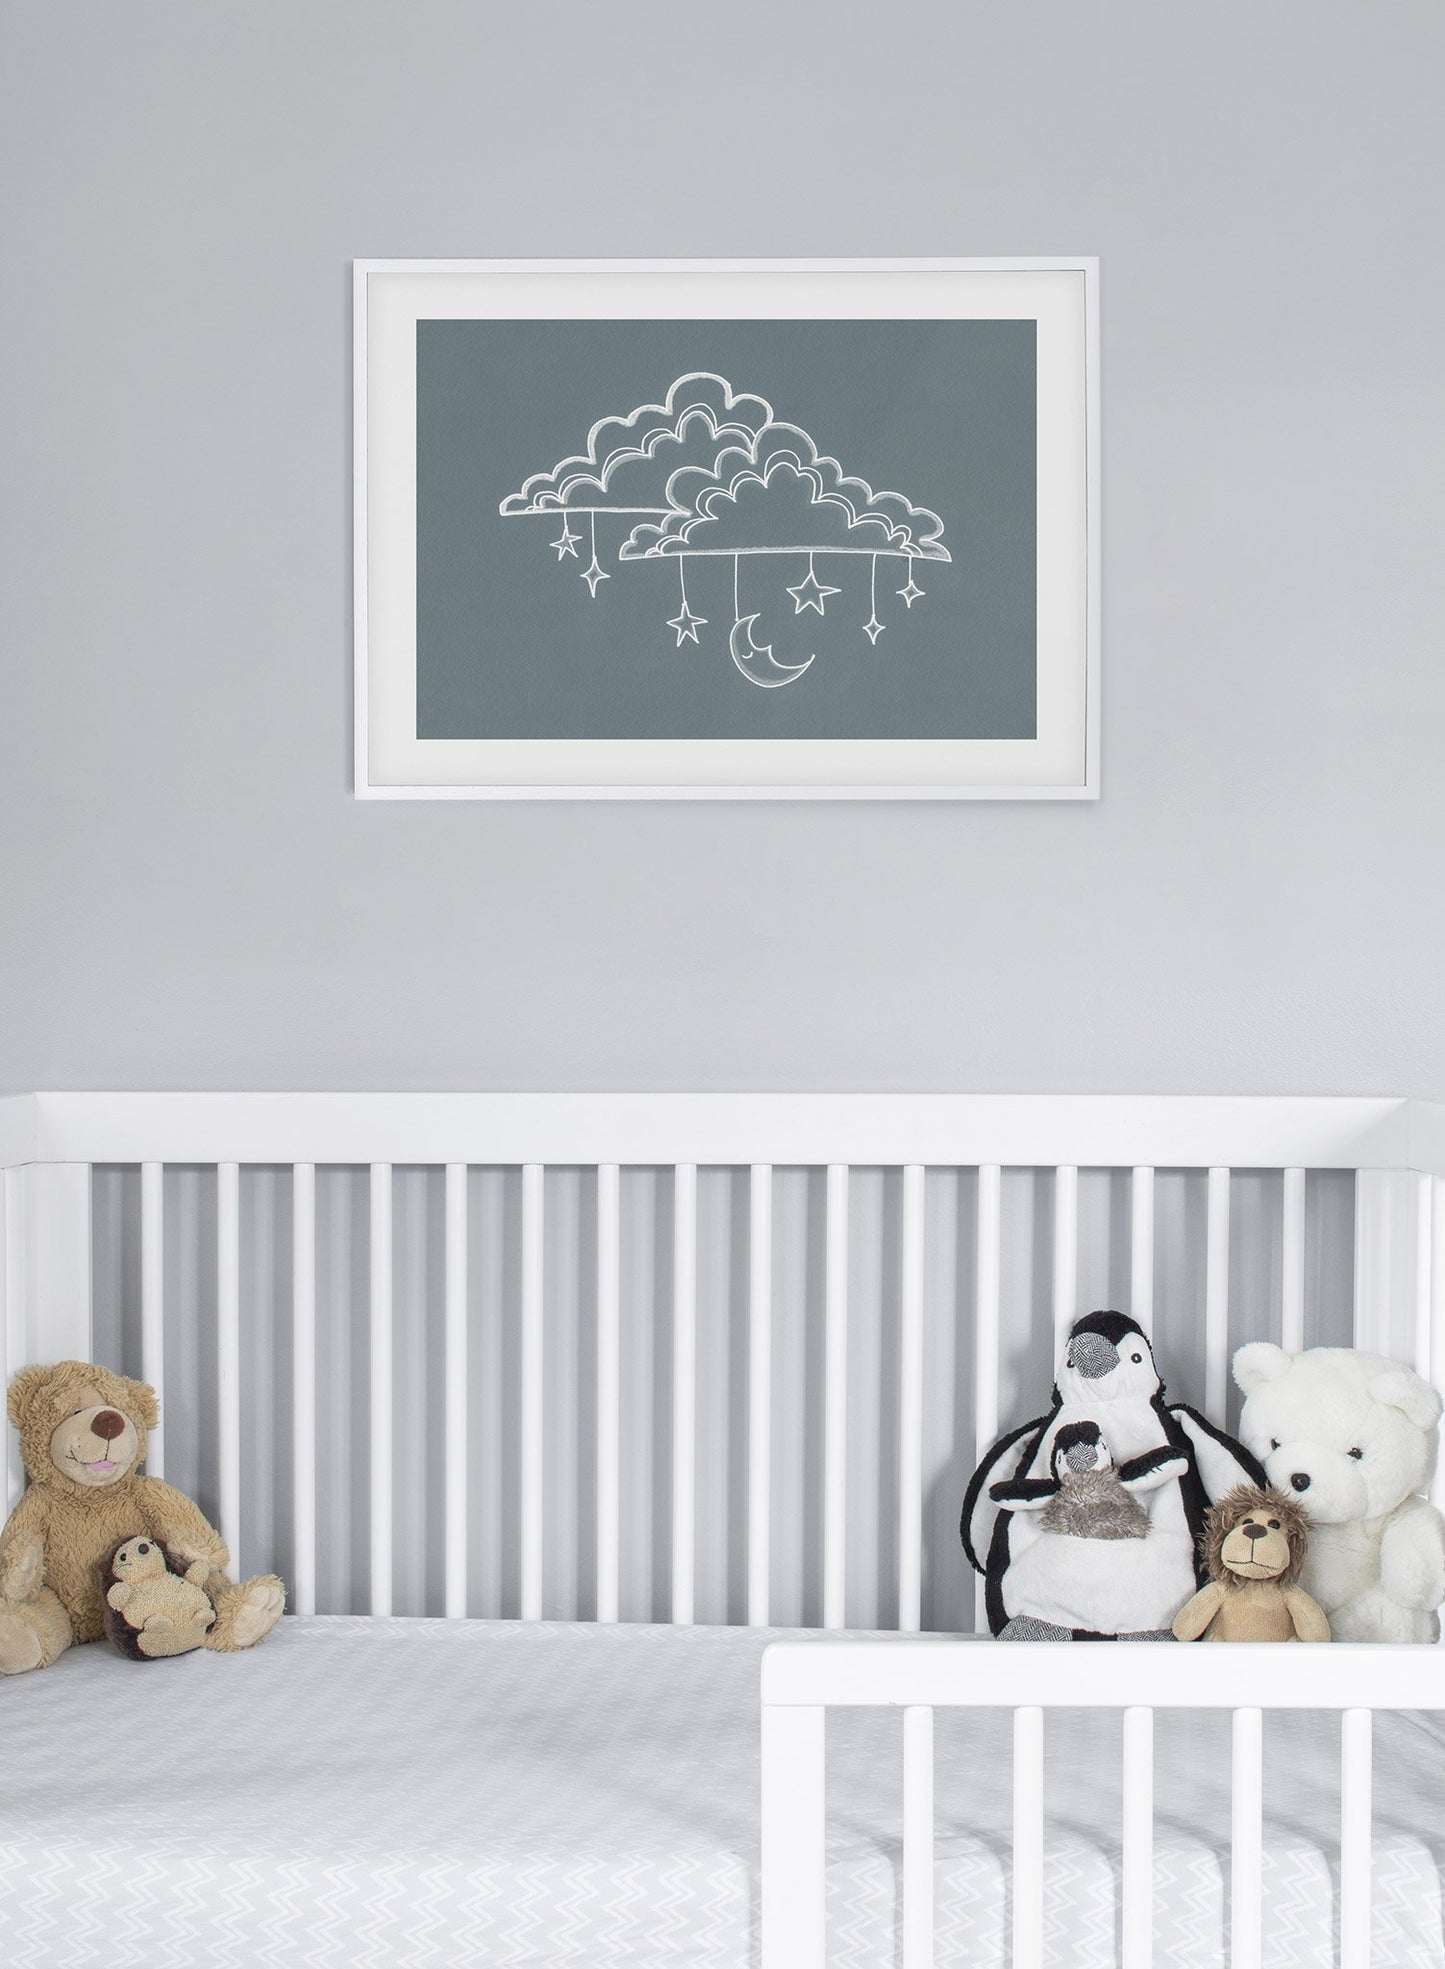 Kids nursery illustration poster by Opposite Wall with sleepy clouds - Lifestyle - Kids Nursery